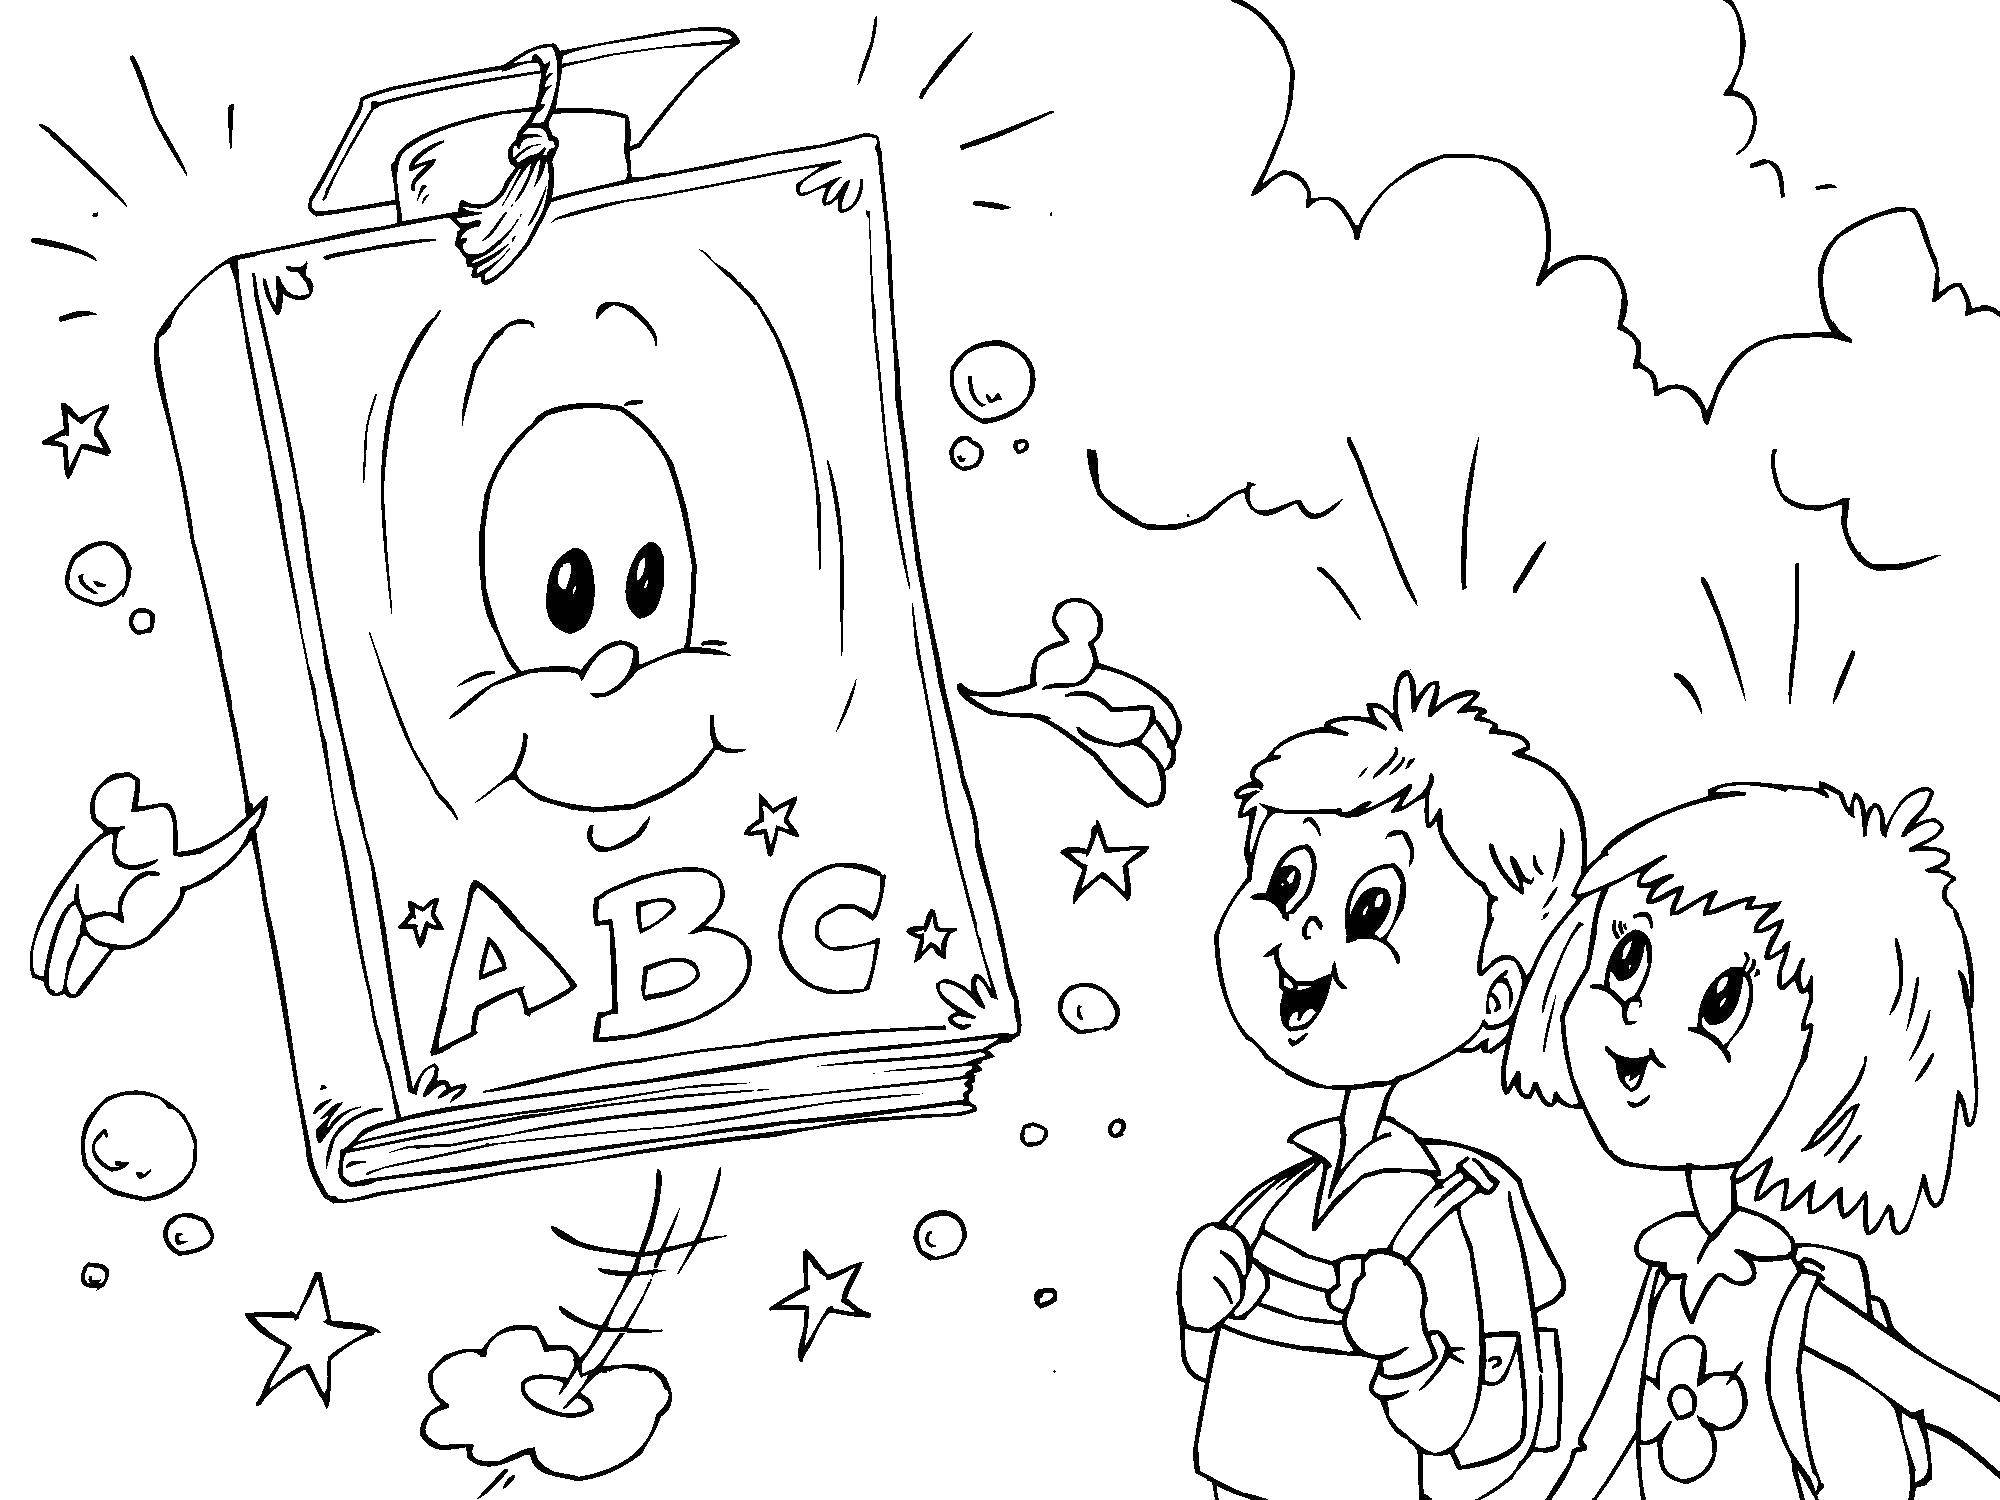 Coloring ABC. Category school supplies. Tags:  a book for pupils.